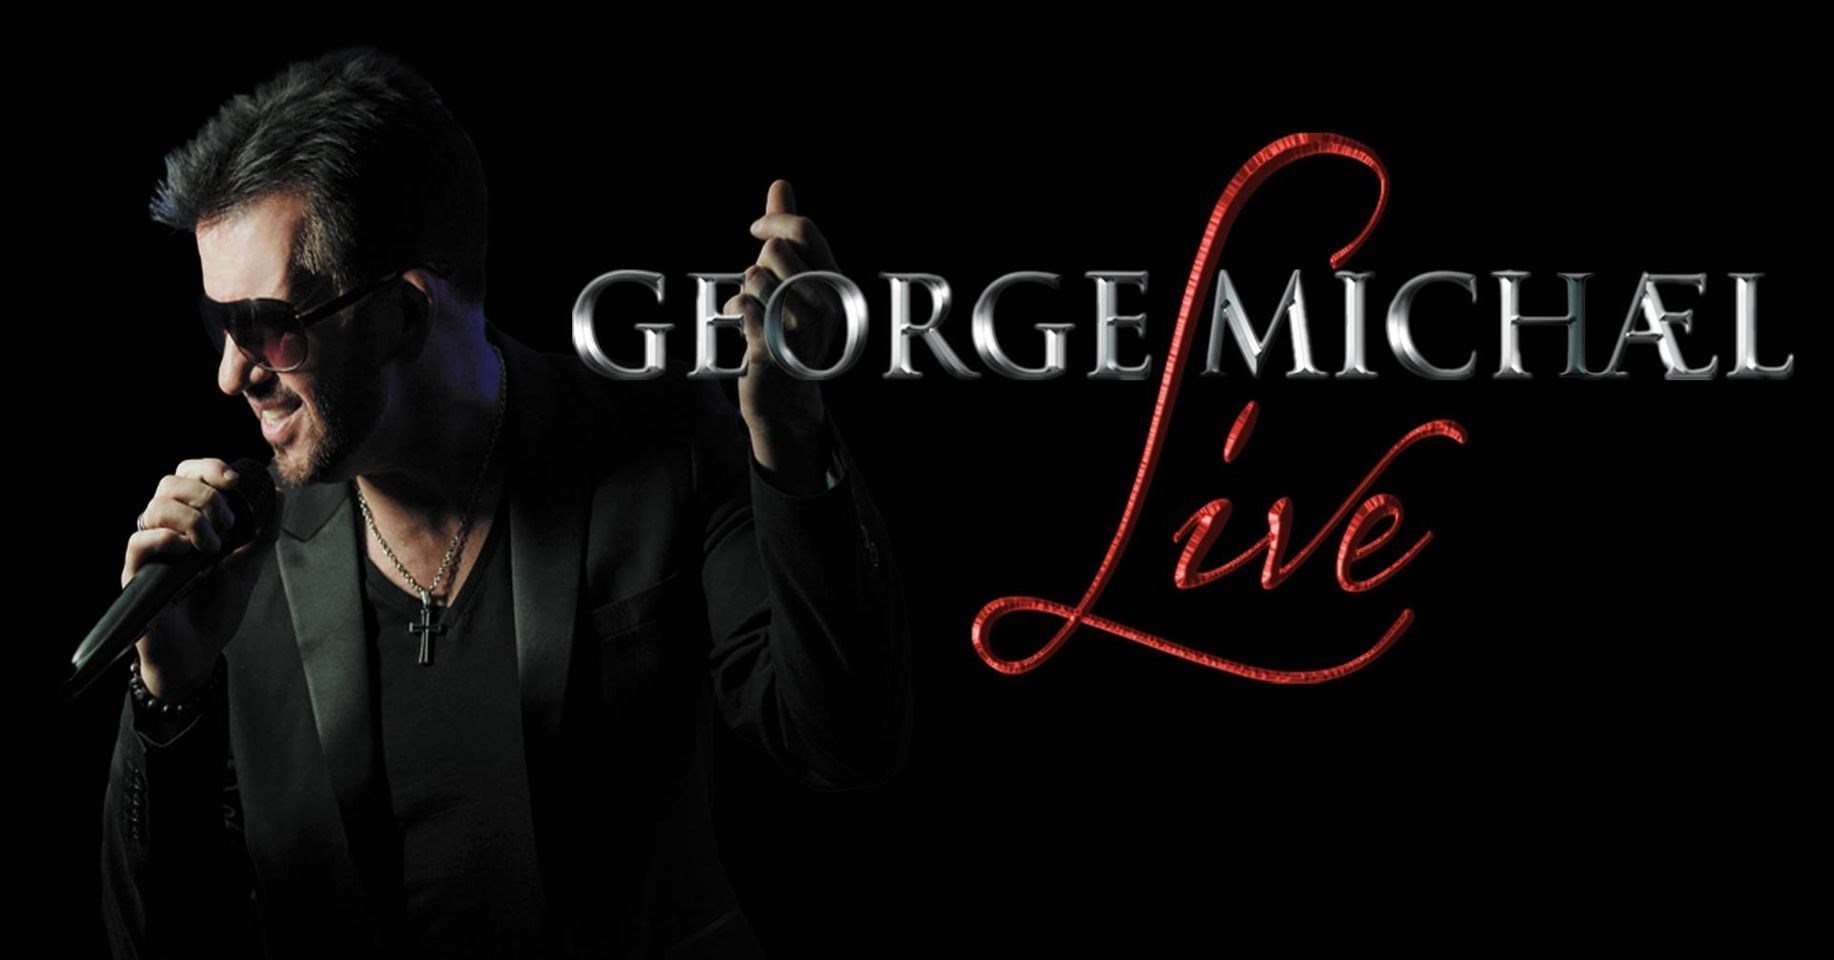 George Michael Live will visit Elgin Town Hall on December 4.